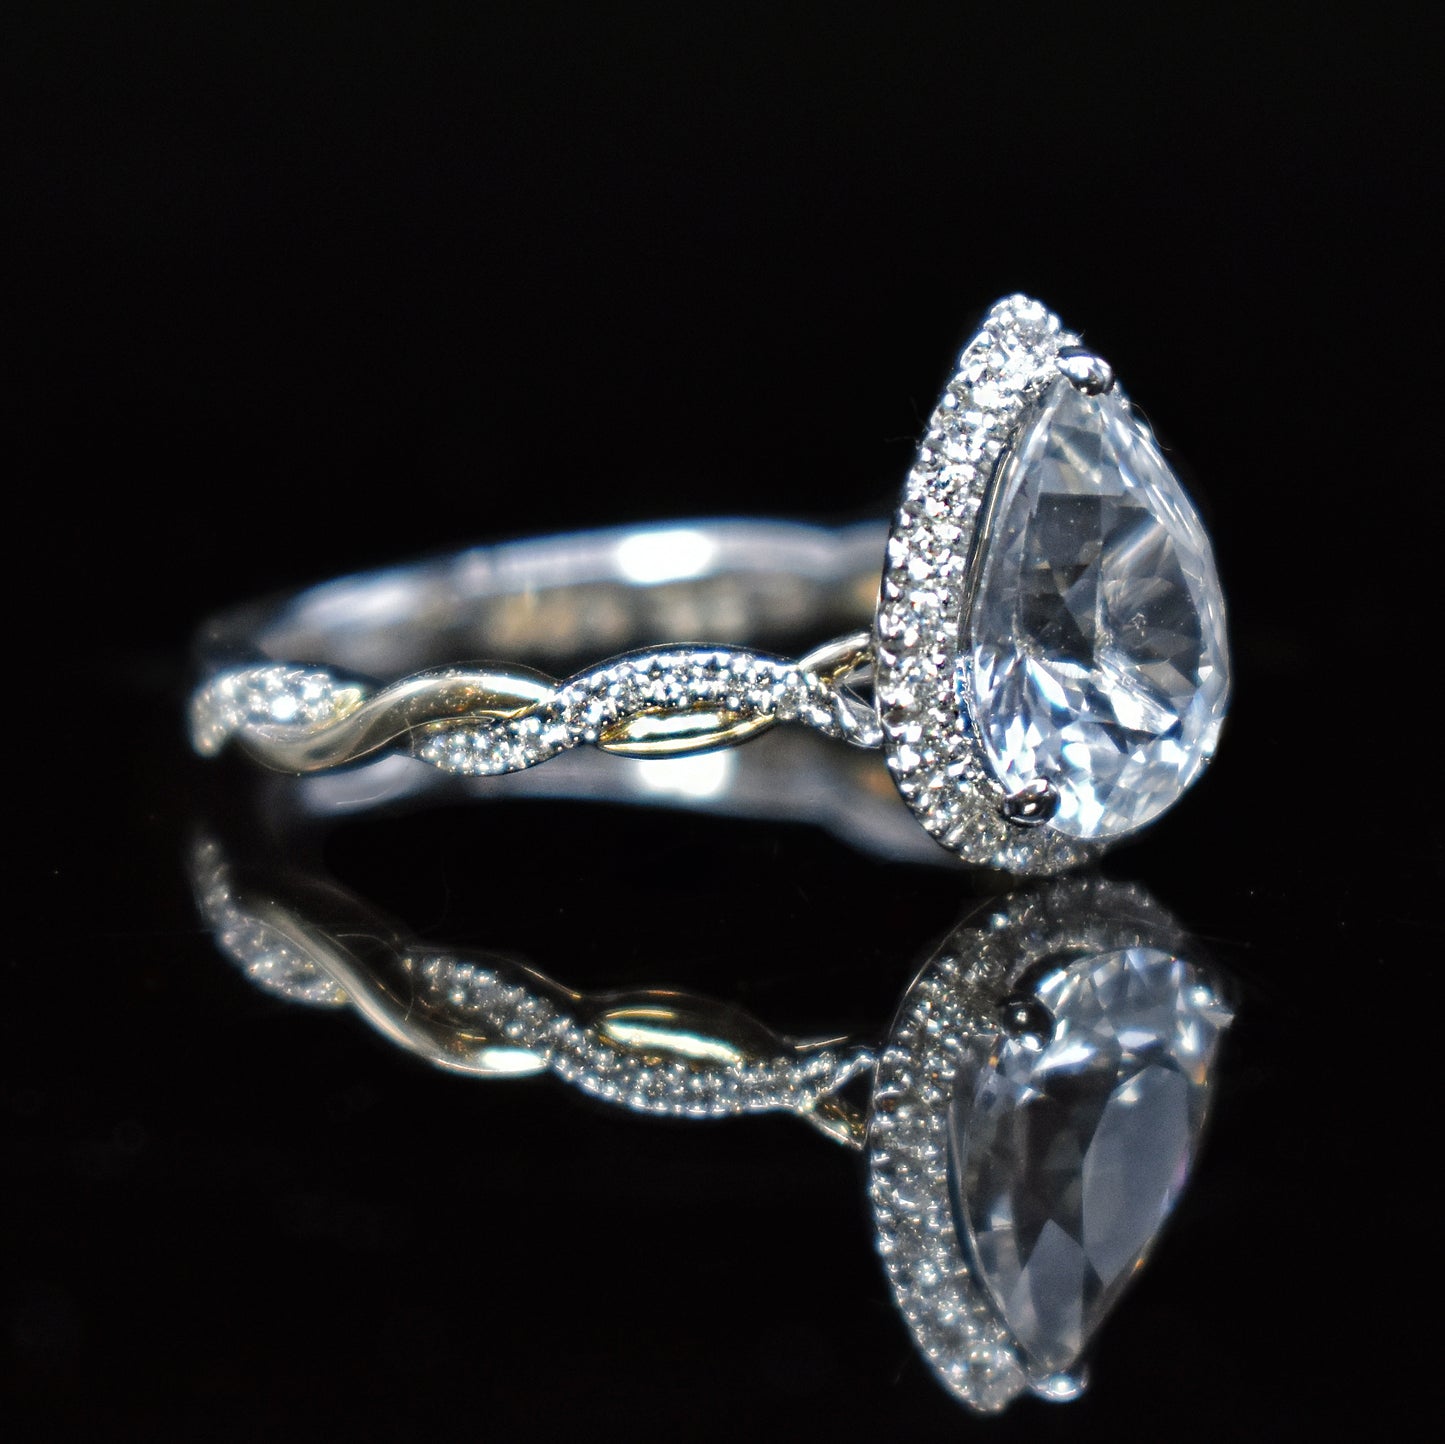 2 toned halo engagement rings